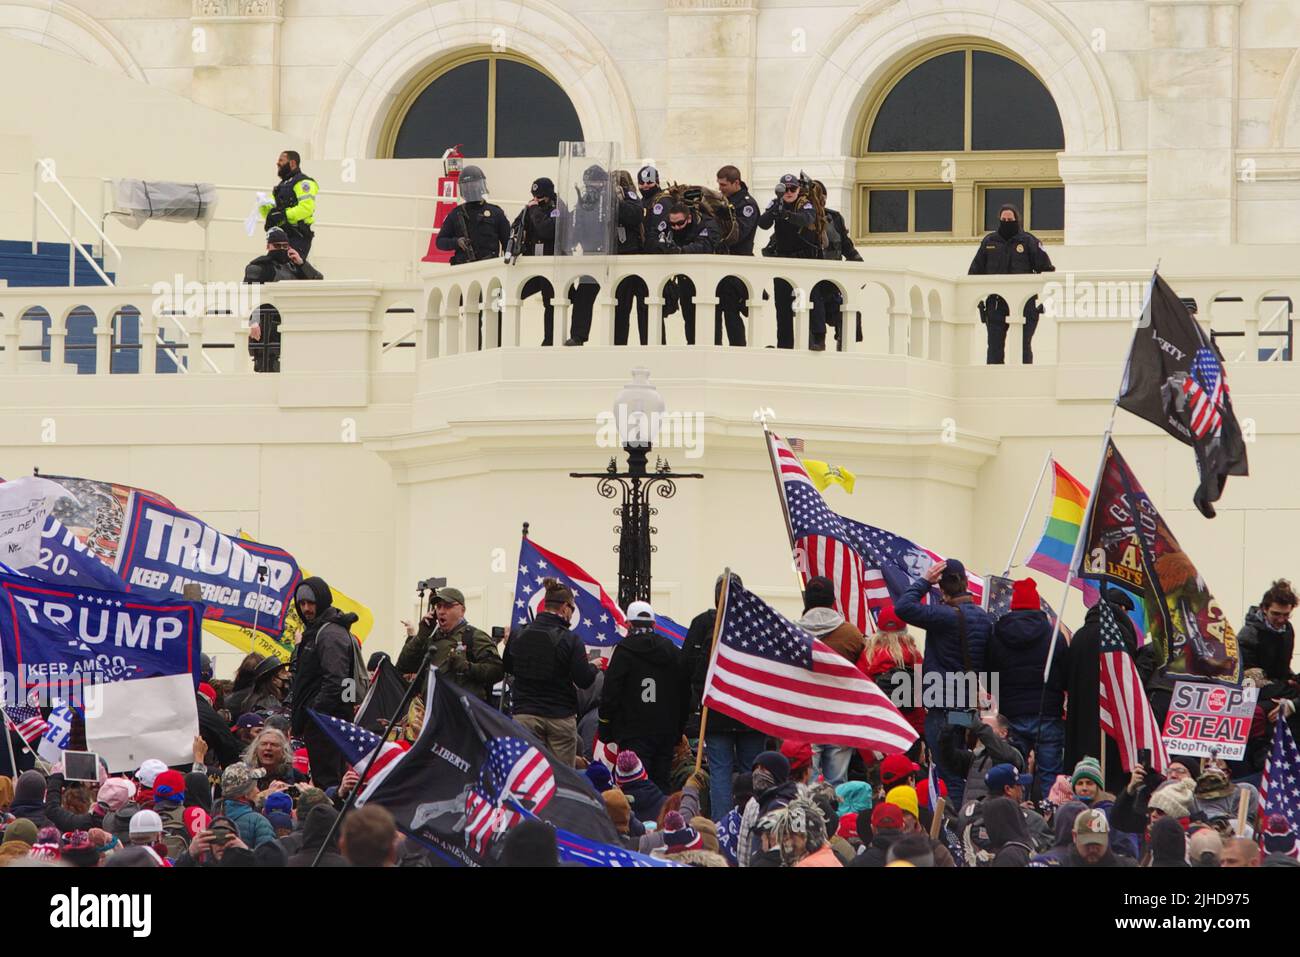 Police in riot gear watch as a mob of pro-Trump protesters gather at the U.S. Capitol on 6 Jan 2021. Stock Photo